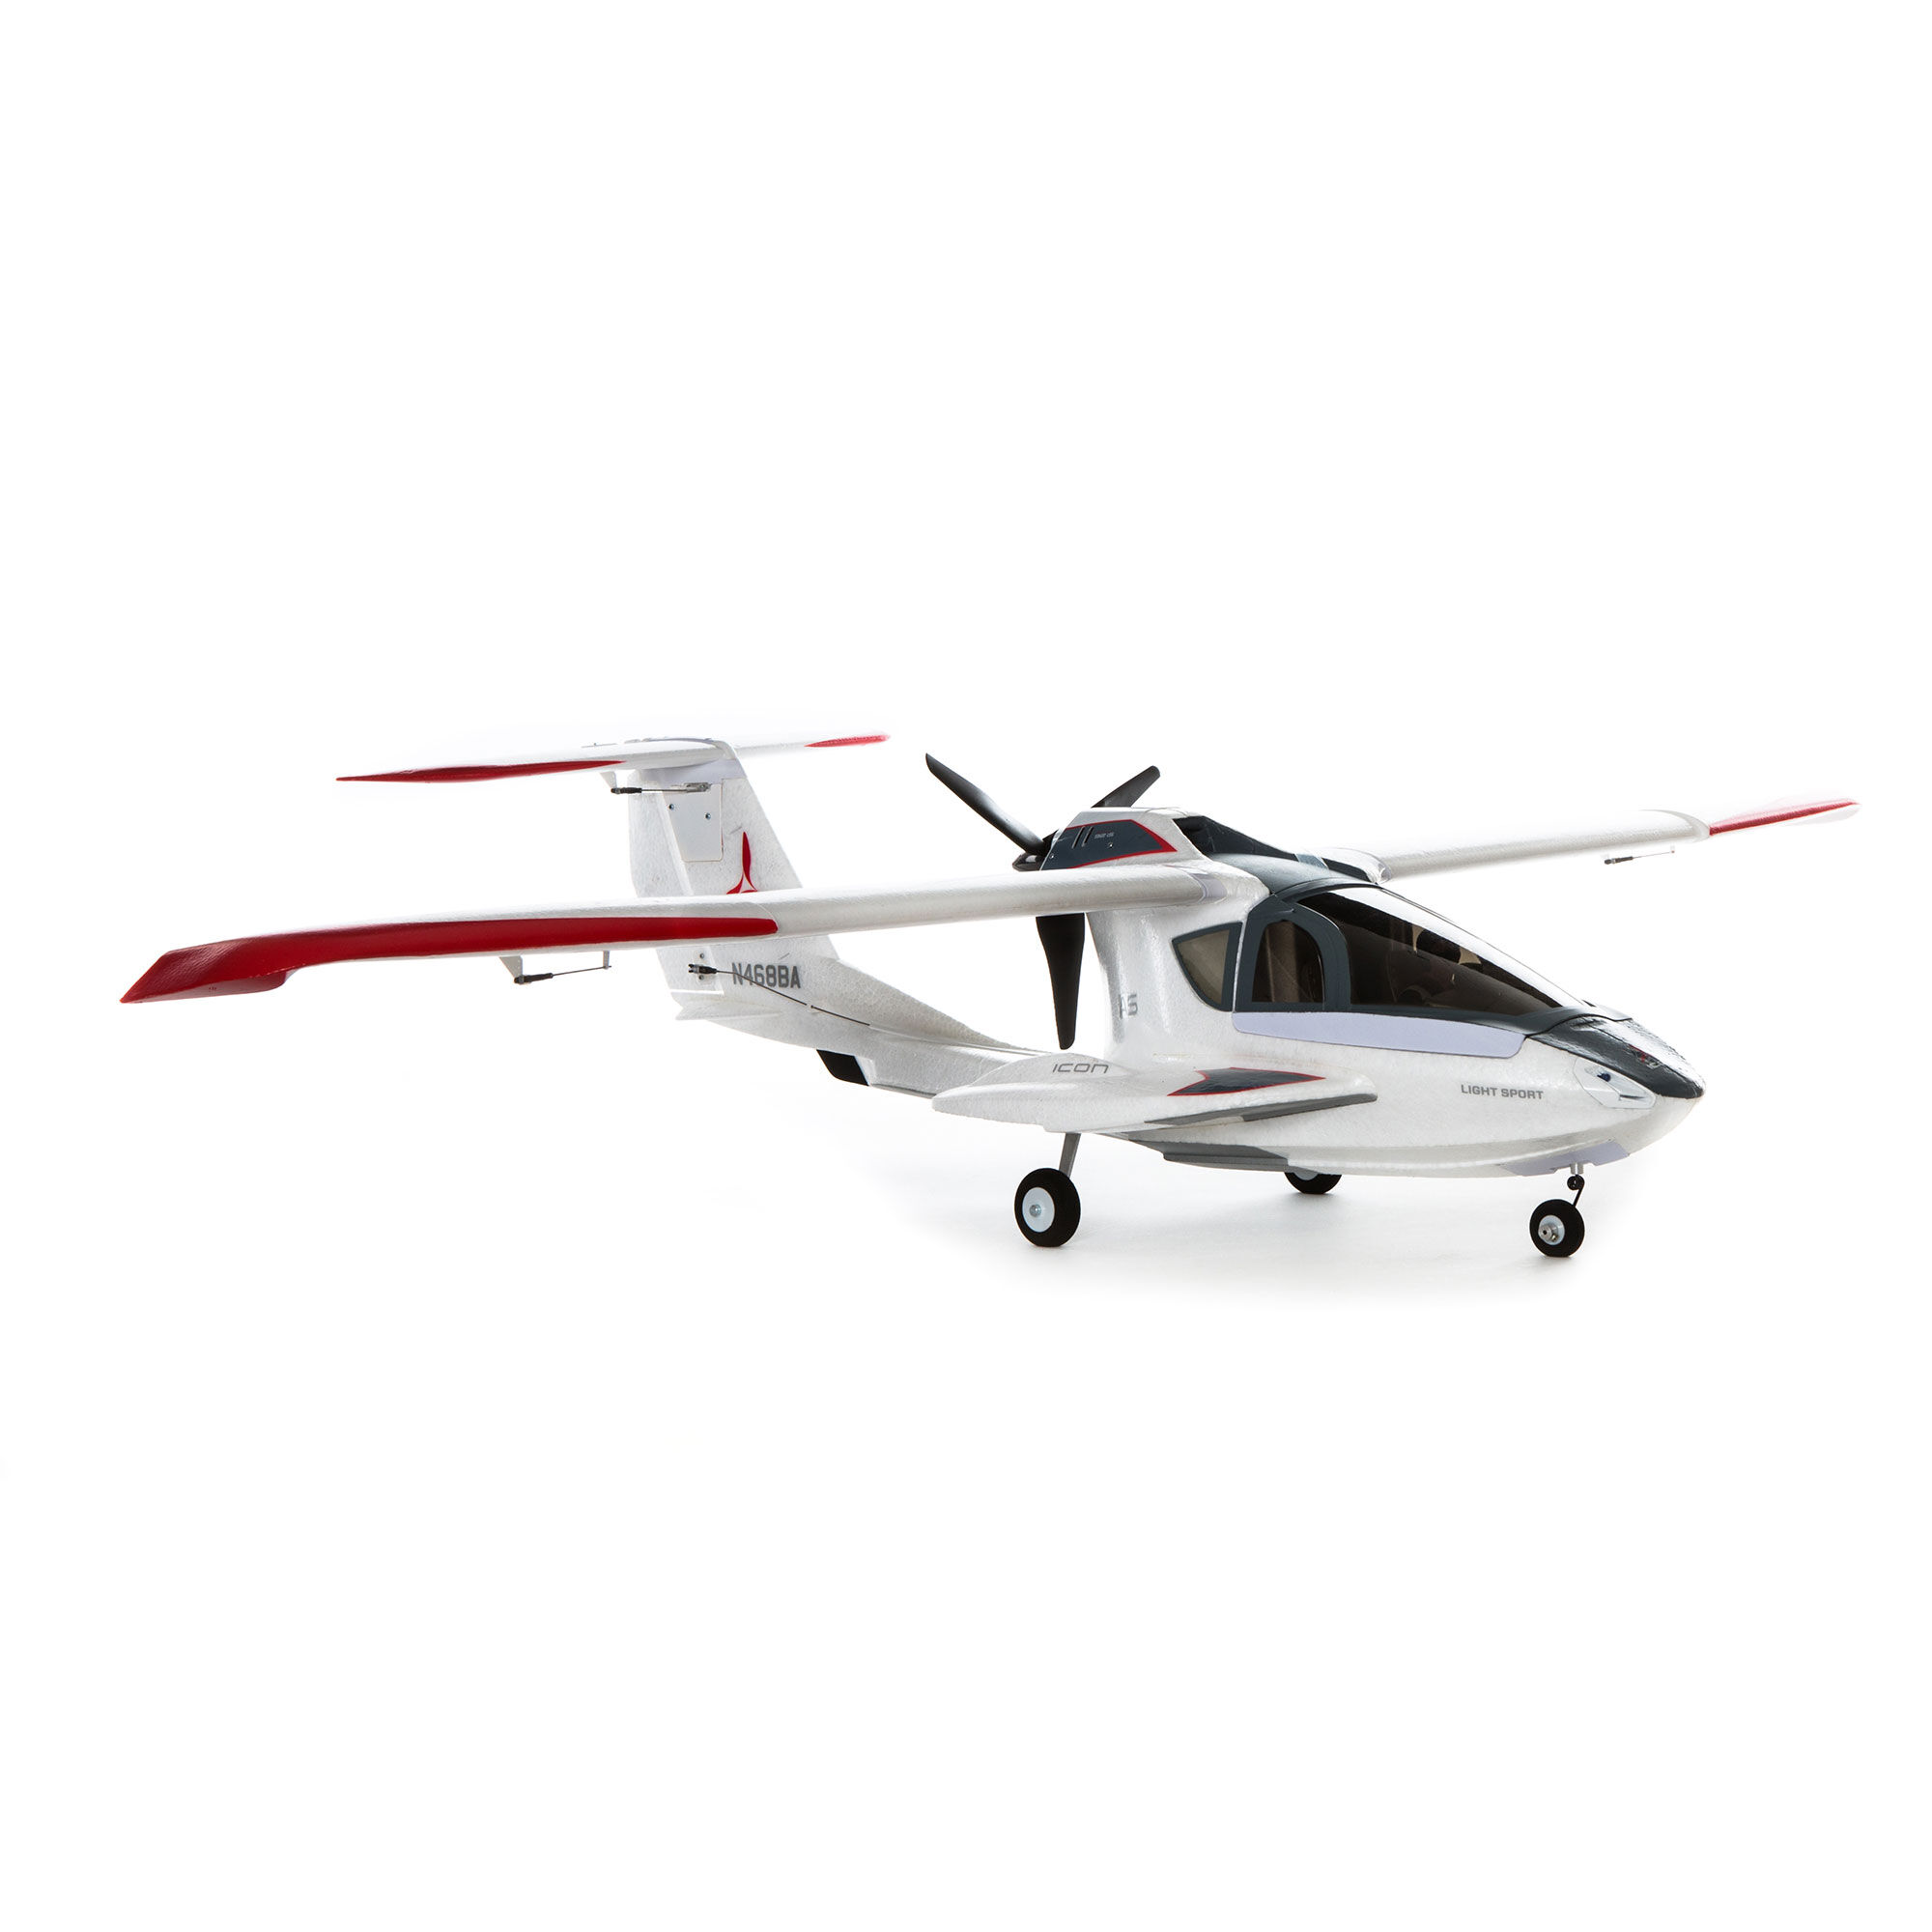 icon a5 rc plane for sale